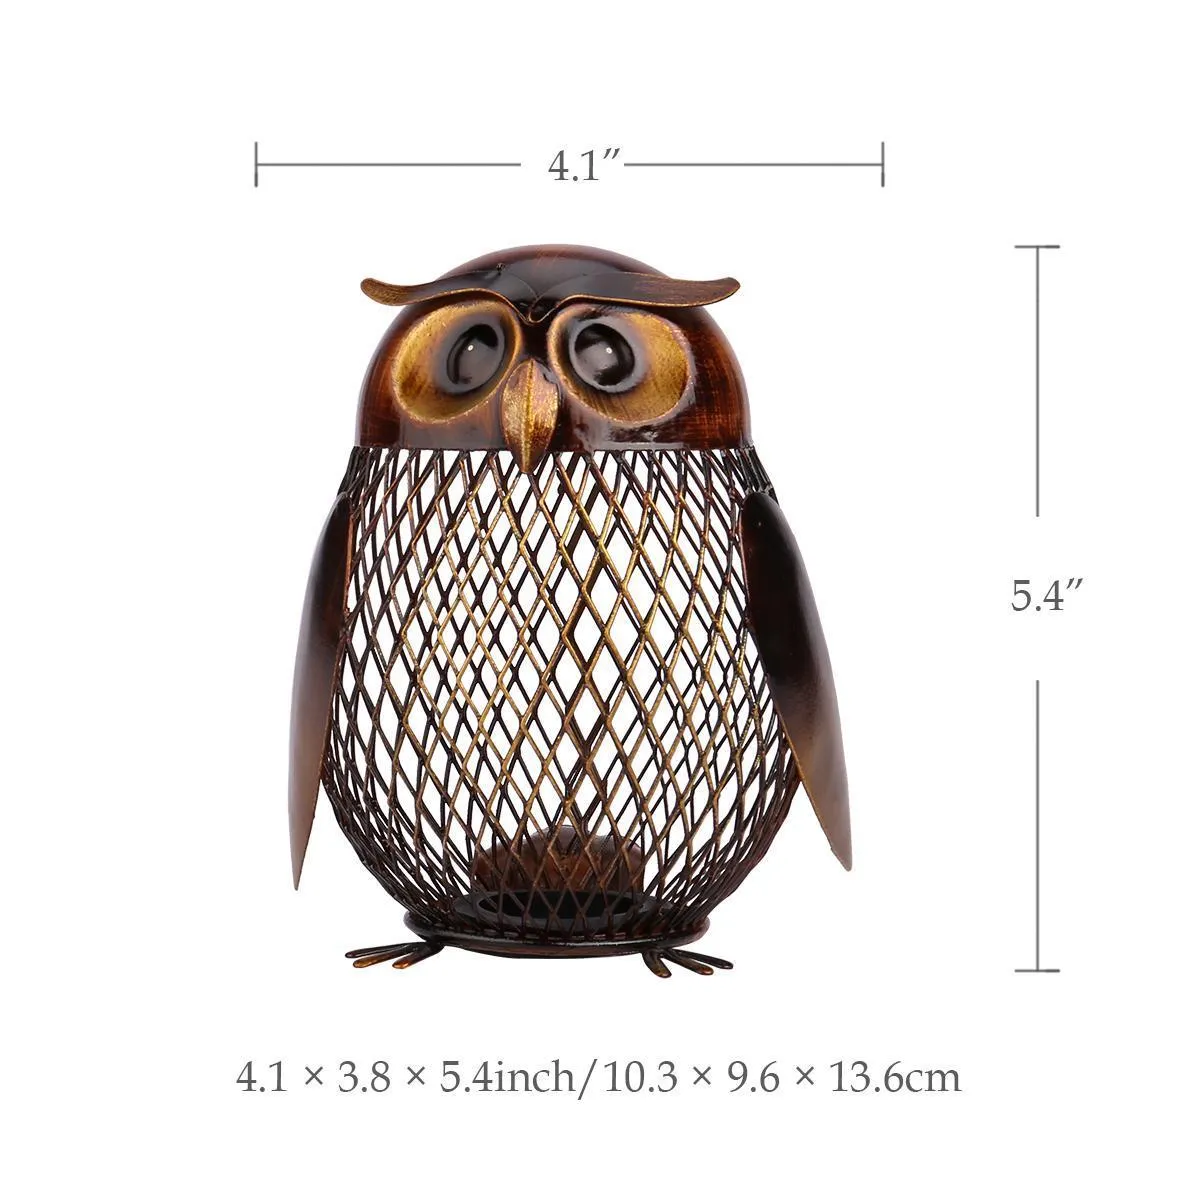 Annan heminredning Tooarts Piggy Bank Owl Figurin Money Box Metal Coin Saving Home Decoration Crafts Gift For Coins Year Decorations Y200106